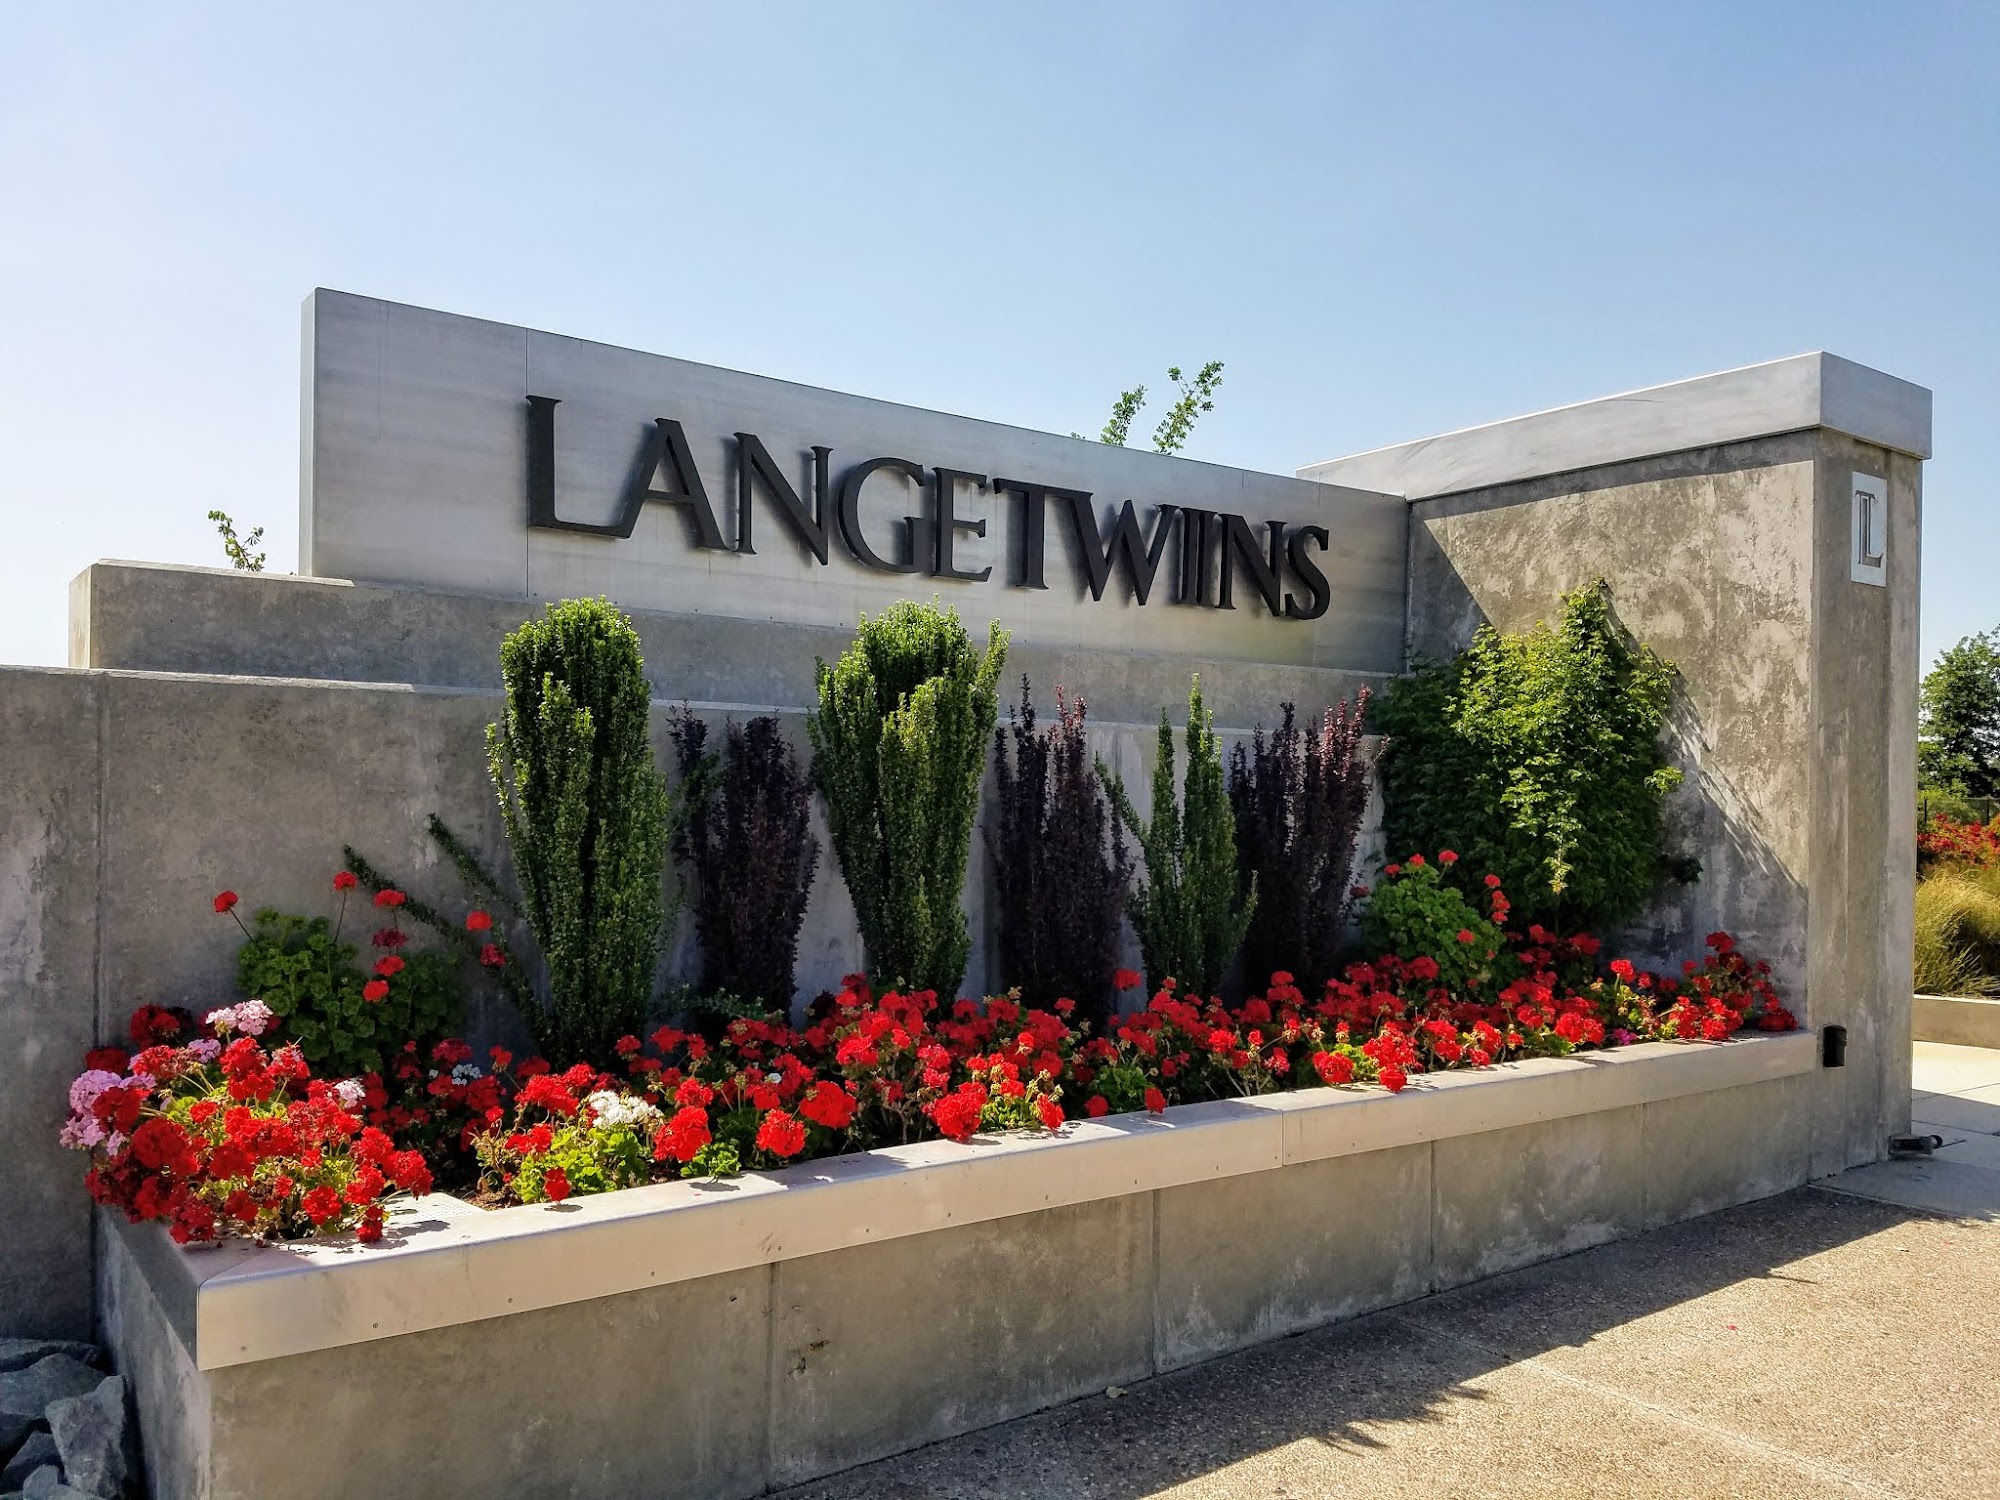 LangeTwins Winery and Vineyards